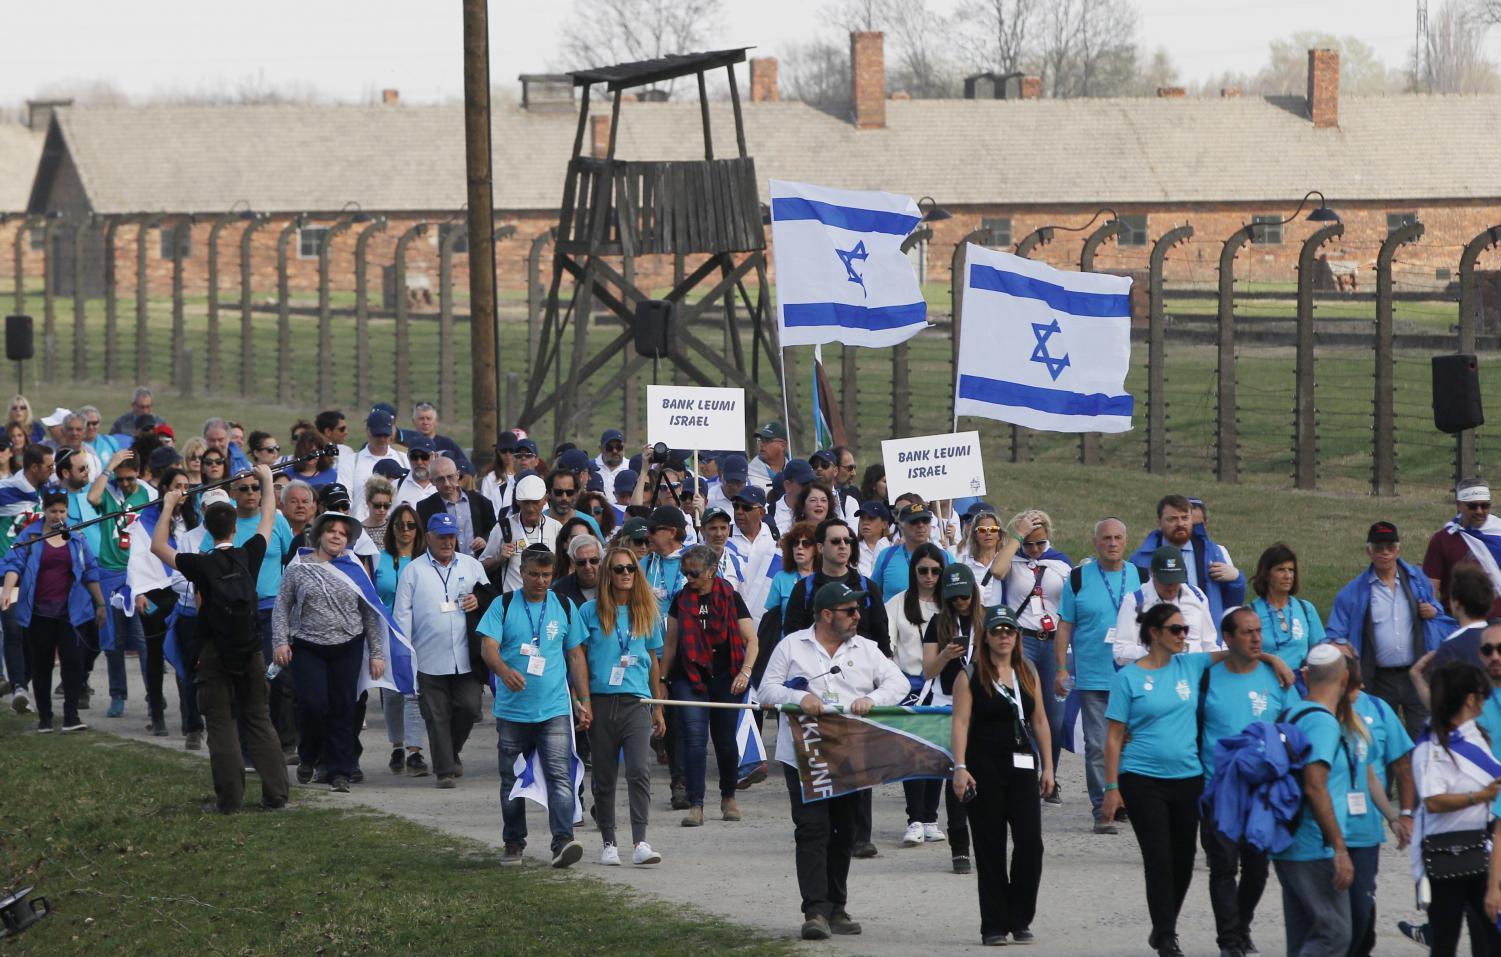 Two+minutes+of+silence+across+nations+sound+importance+of+Holocaust+Remembrance+March